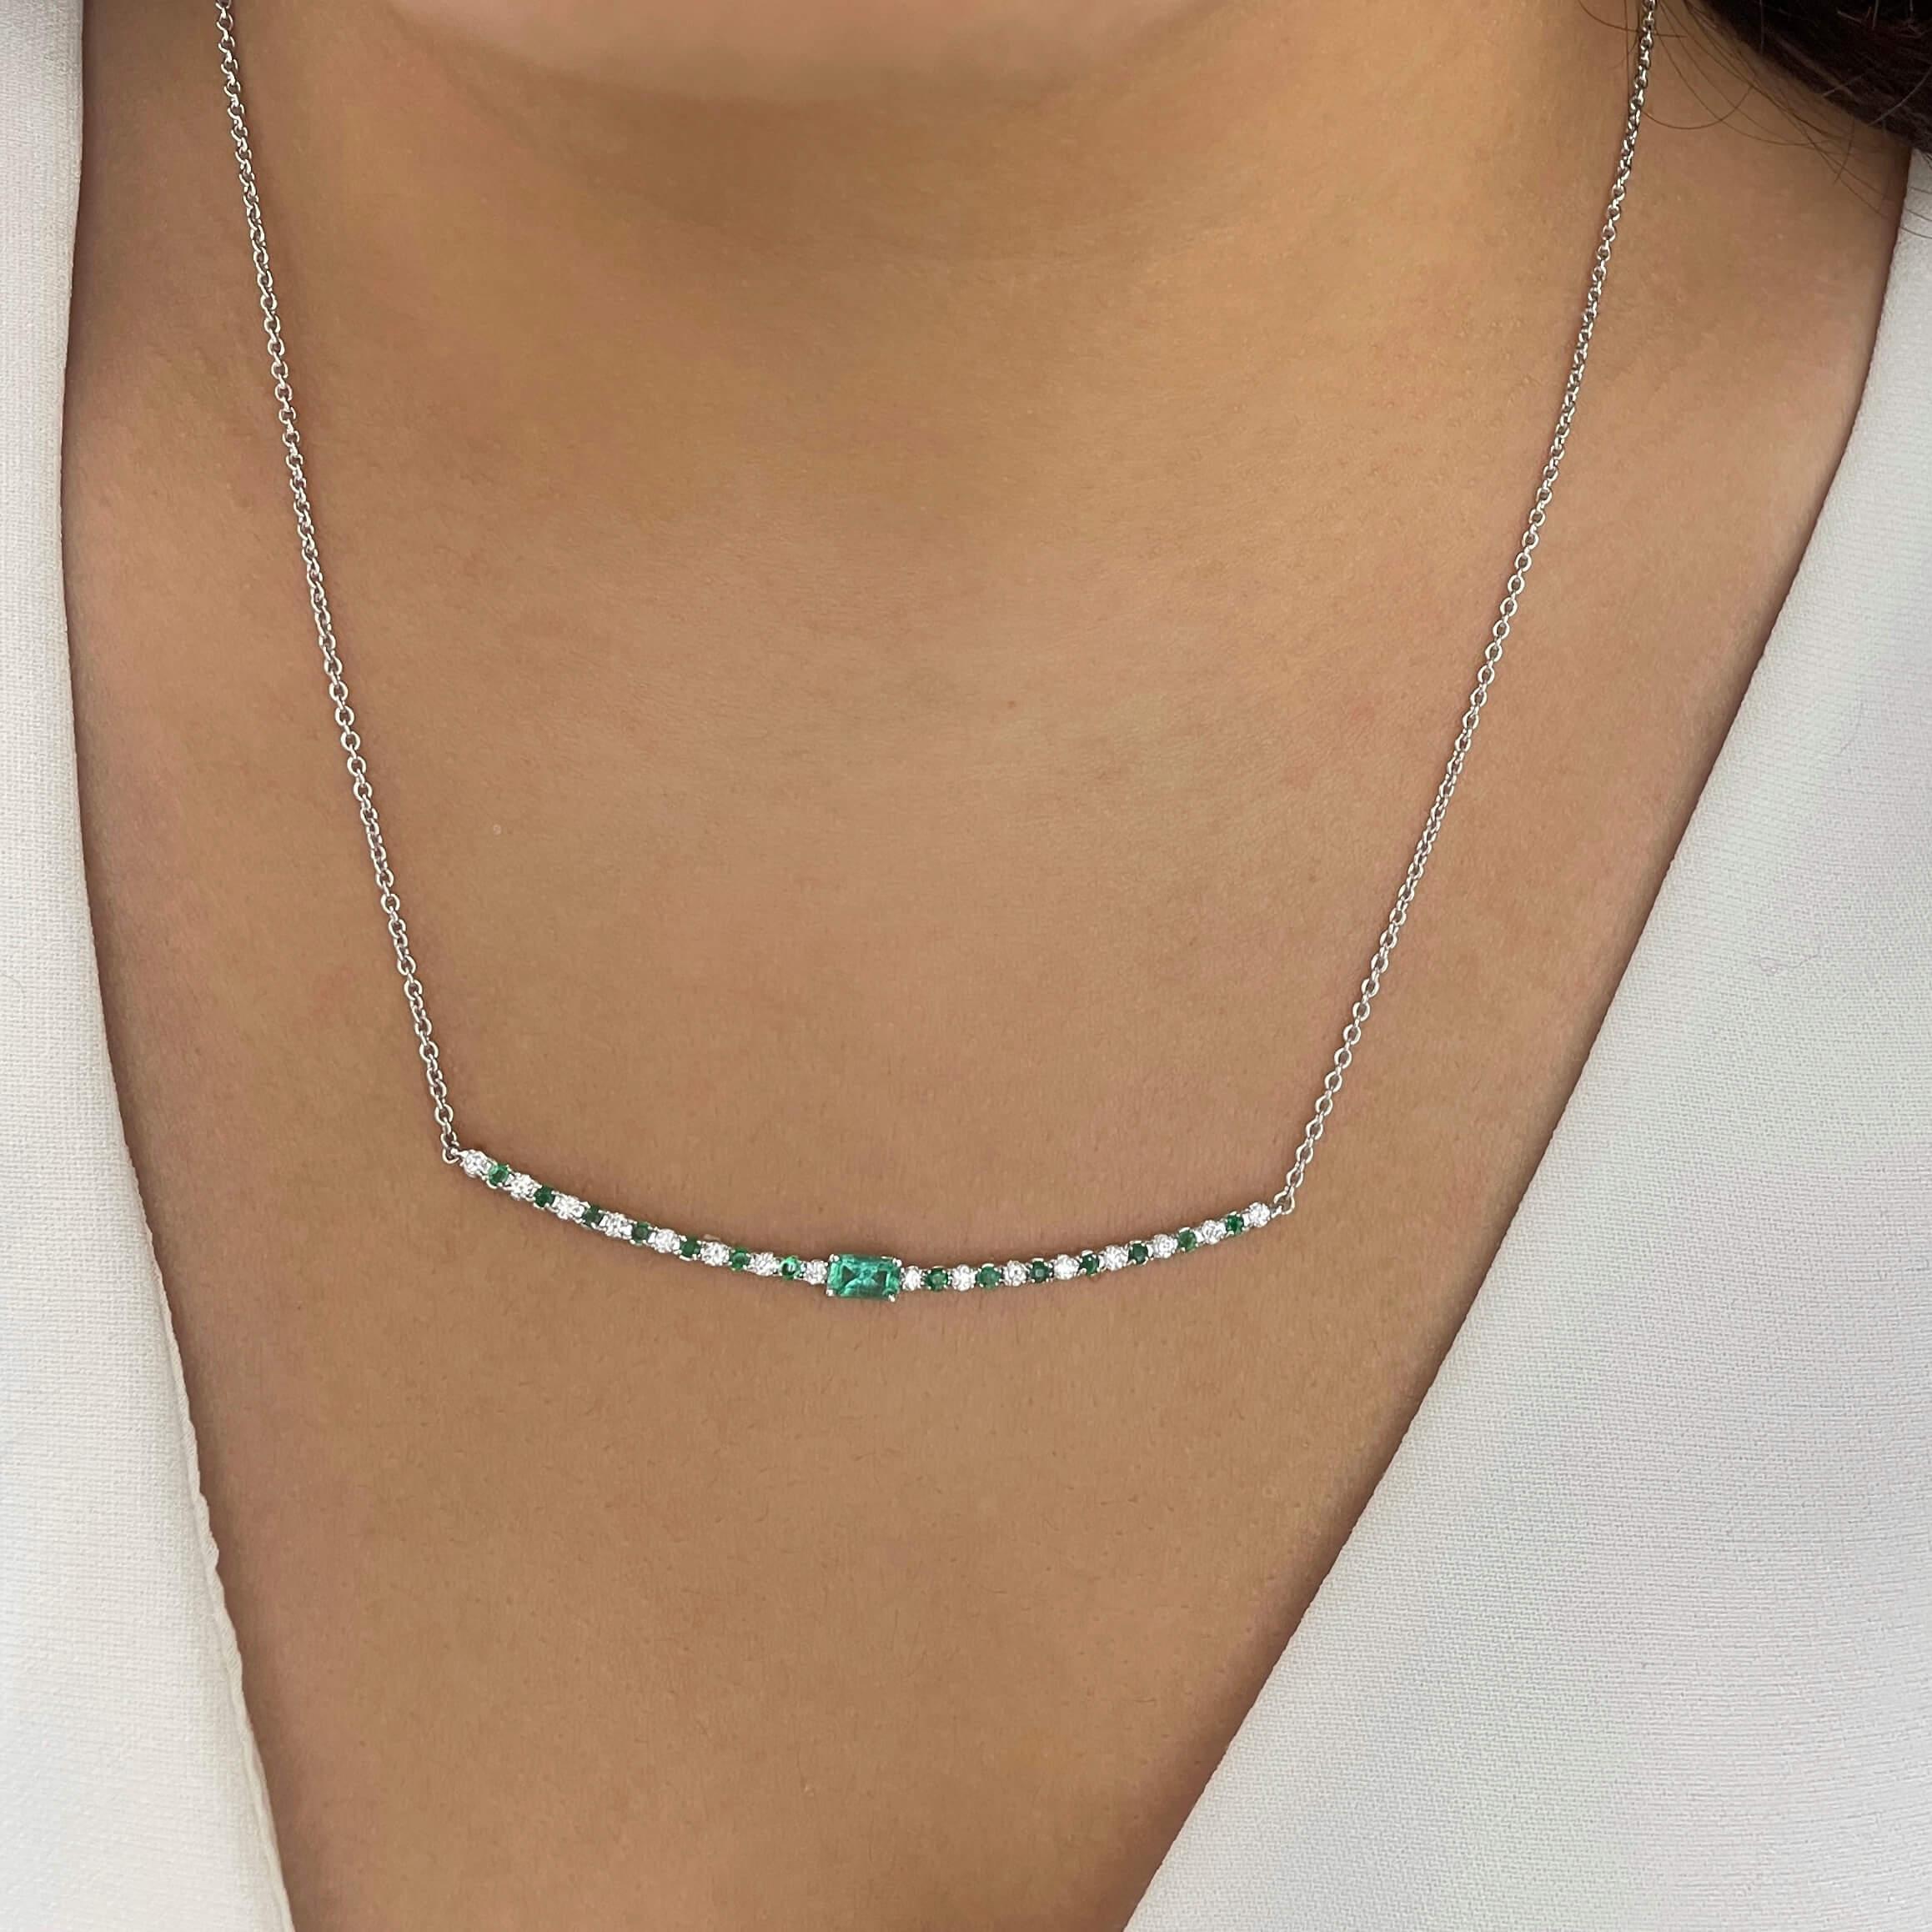 Add a pop of color to your everyday wardrobe with this emerald and diamond necklace featuring a beautiful emerald center stone and alternating round diamonds and emeralds. Available in two center stone sizes, 7x5 and 5x3.

14K White Gold Emerald and